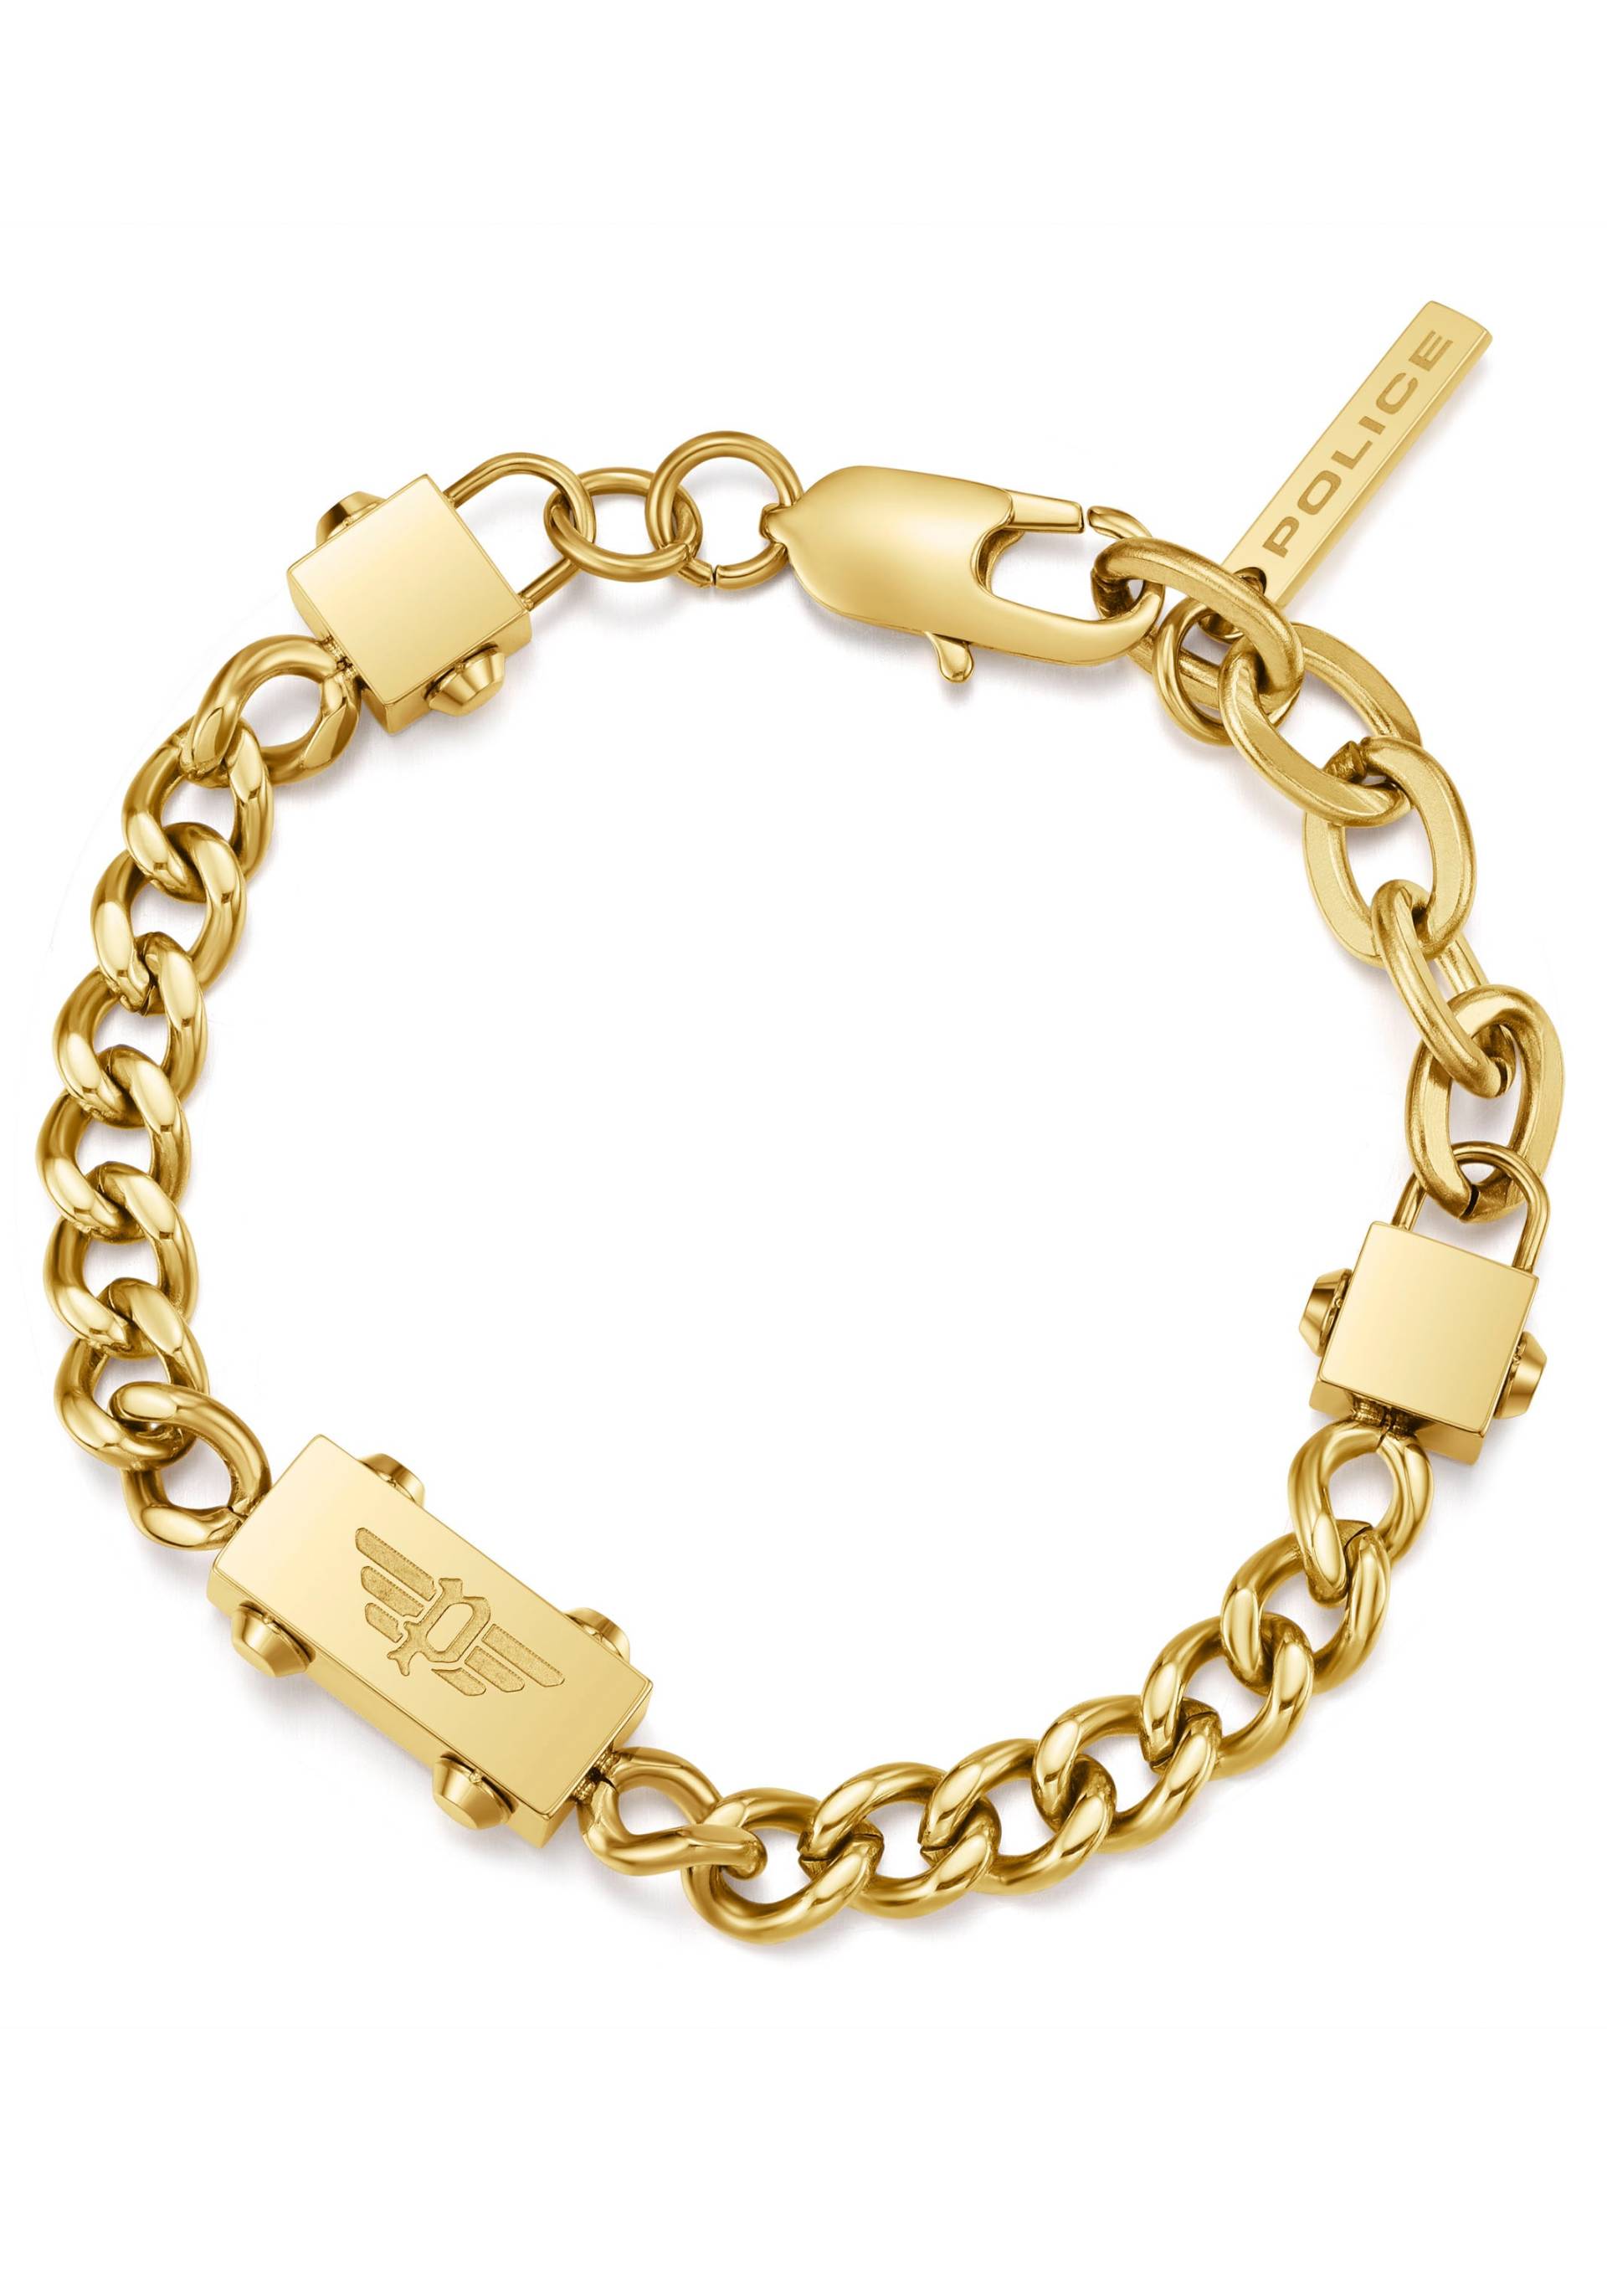 Police Armband »CHAINED, PEAGB0002102, PEAGB0002106« von Police